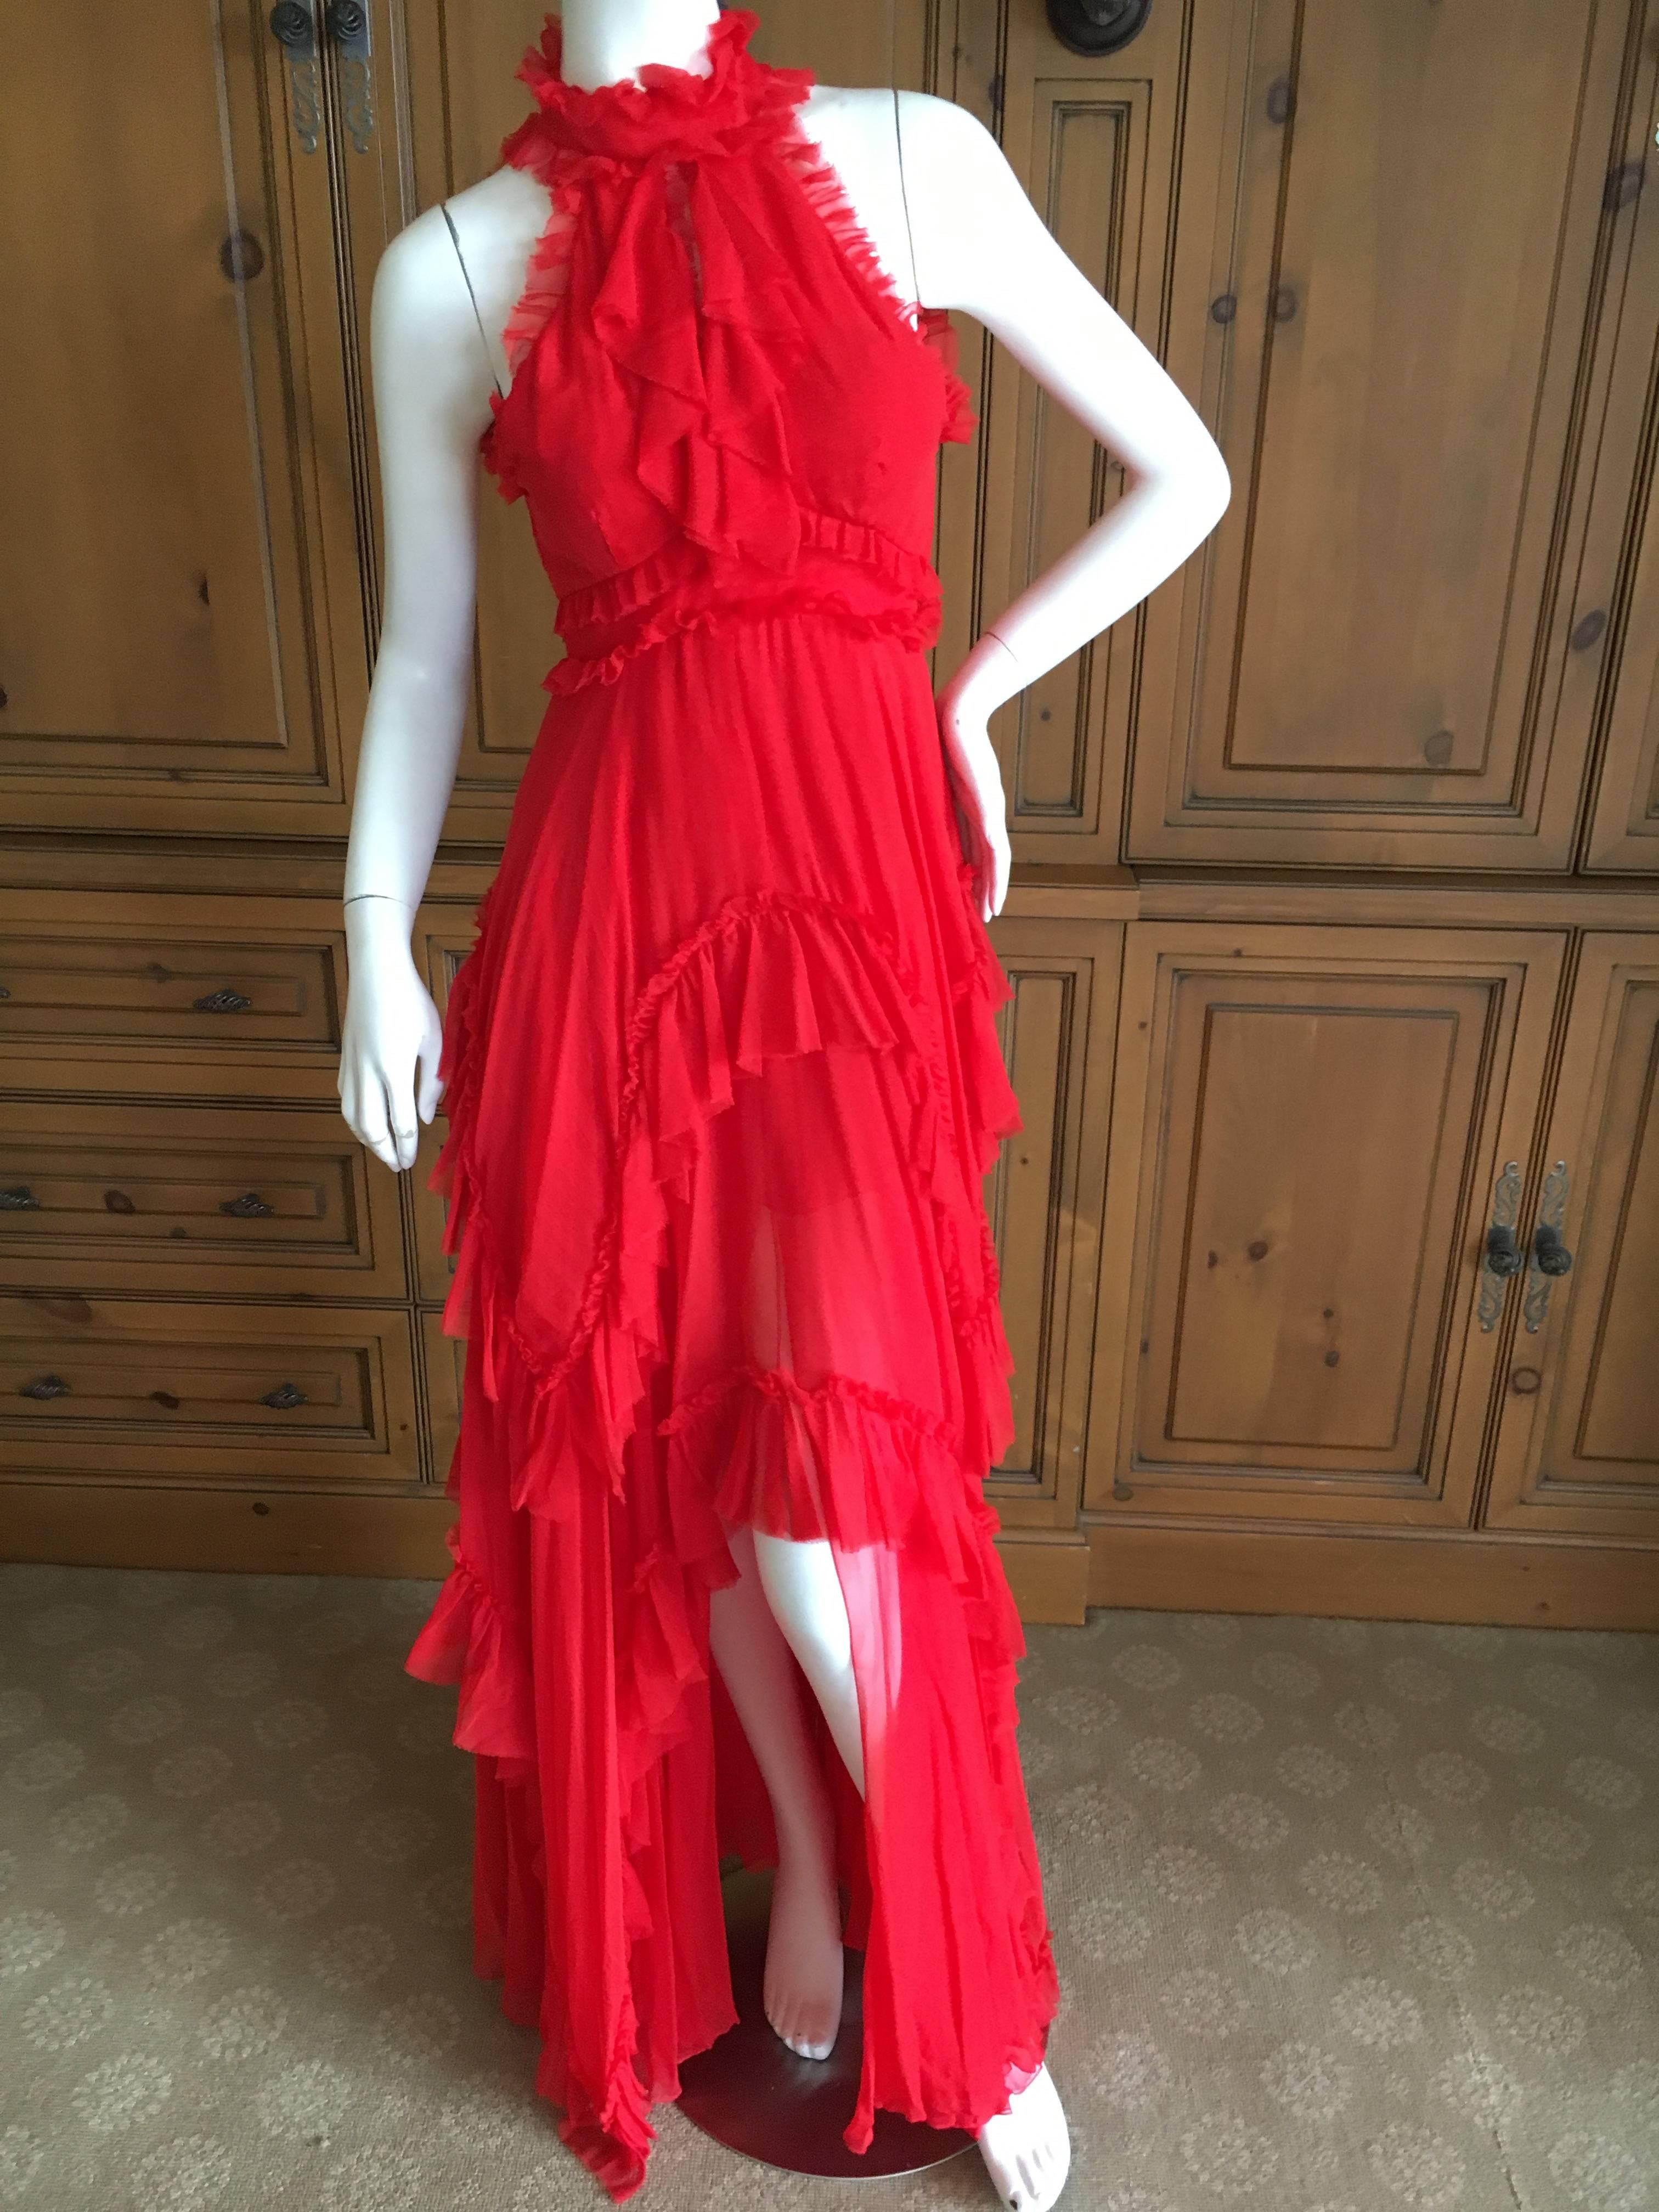 Red Emelio Pucci Scarlet Silk Ruffled Halter Dress  For Sale